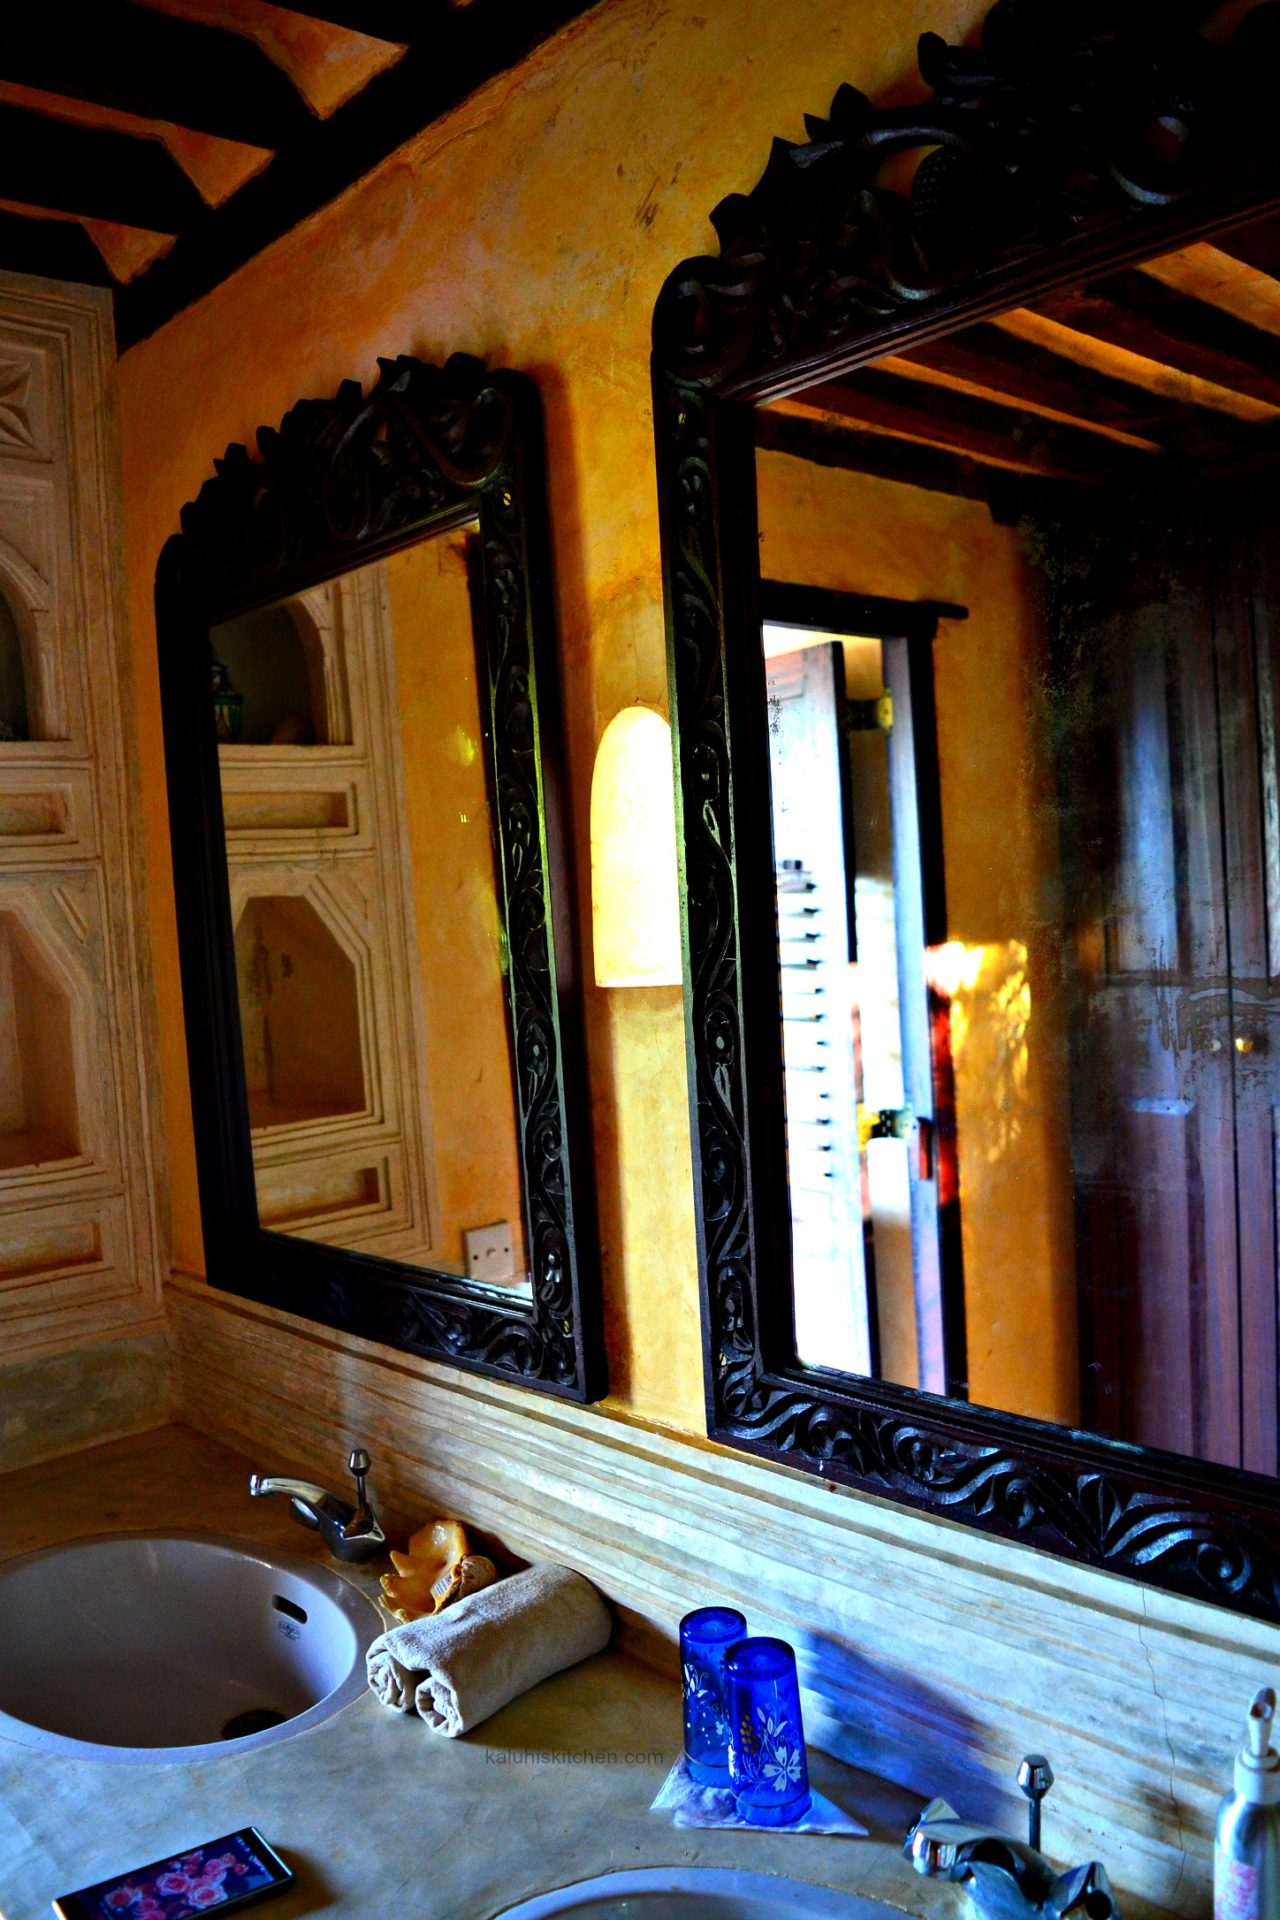 bathrooms at kiwandani house have a strong coastal feel and have the marble finishing and plaster unique to Lamu